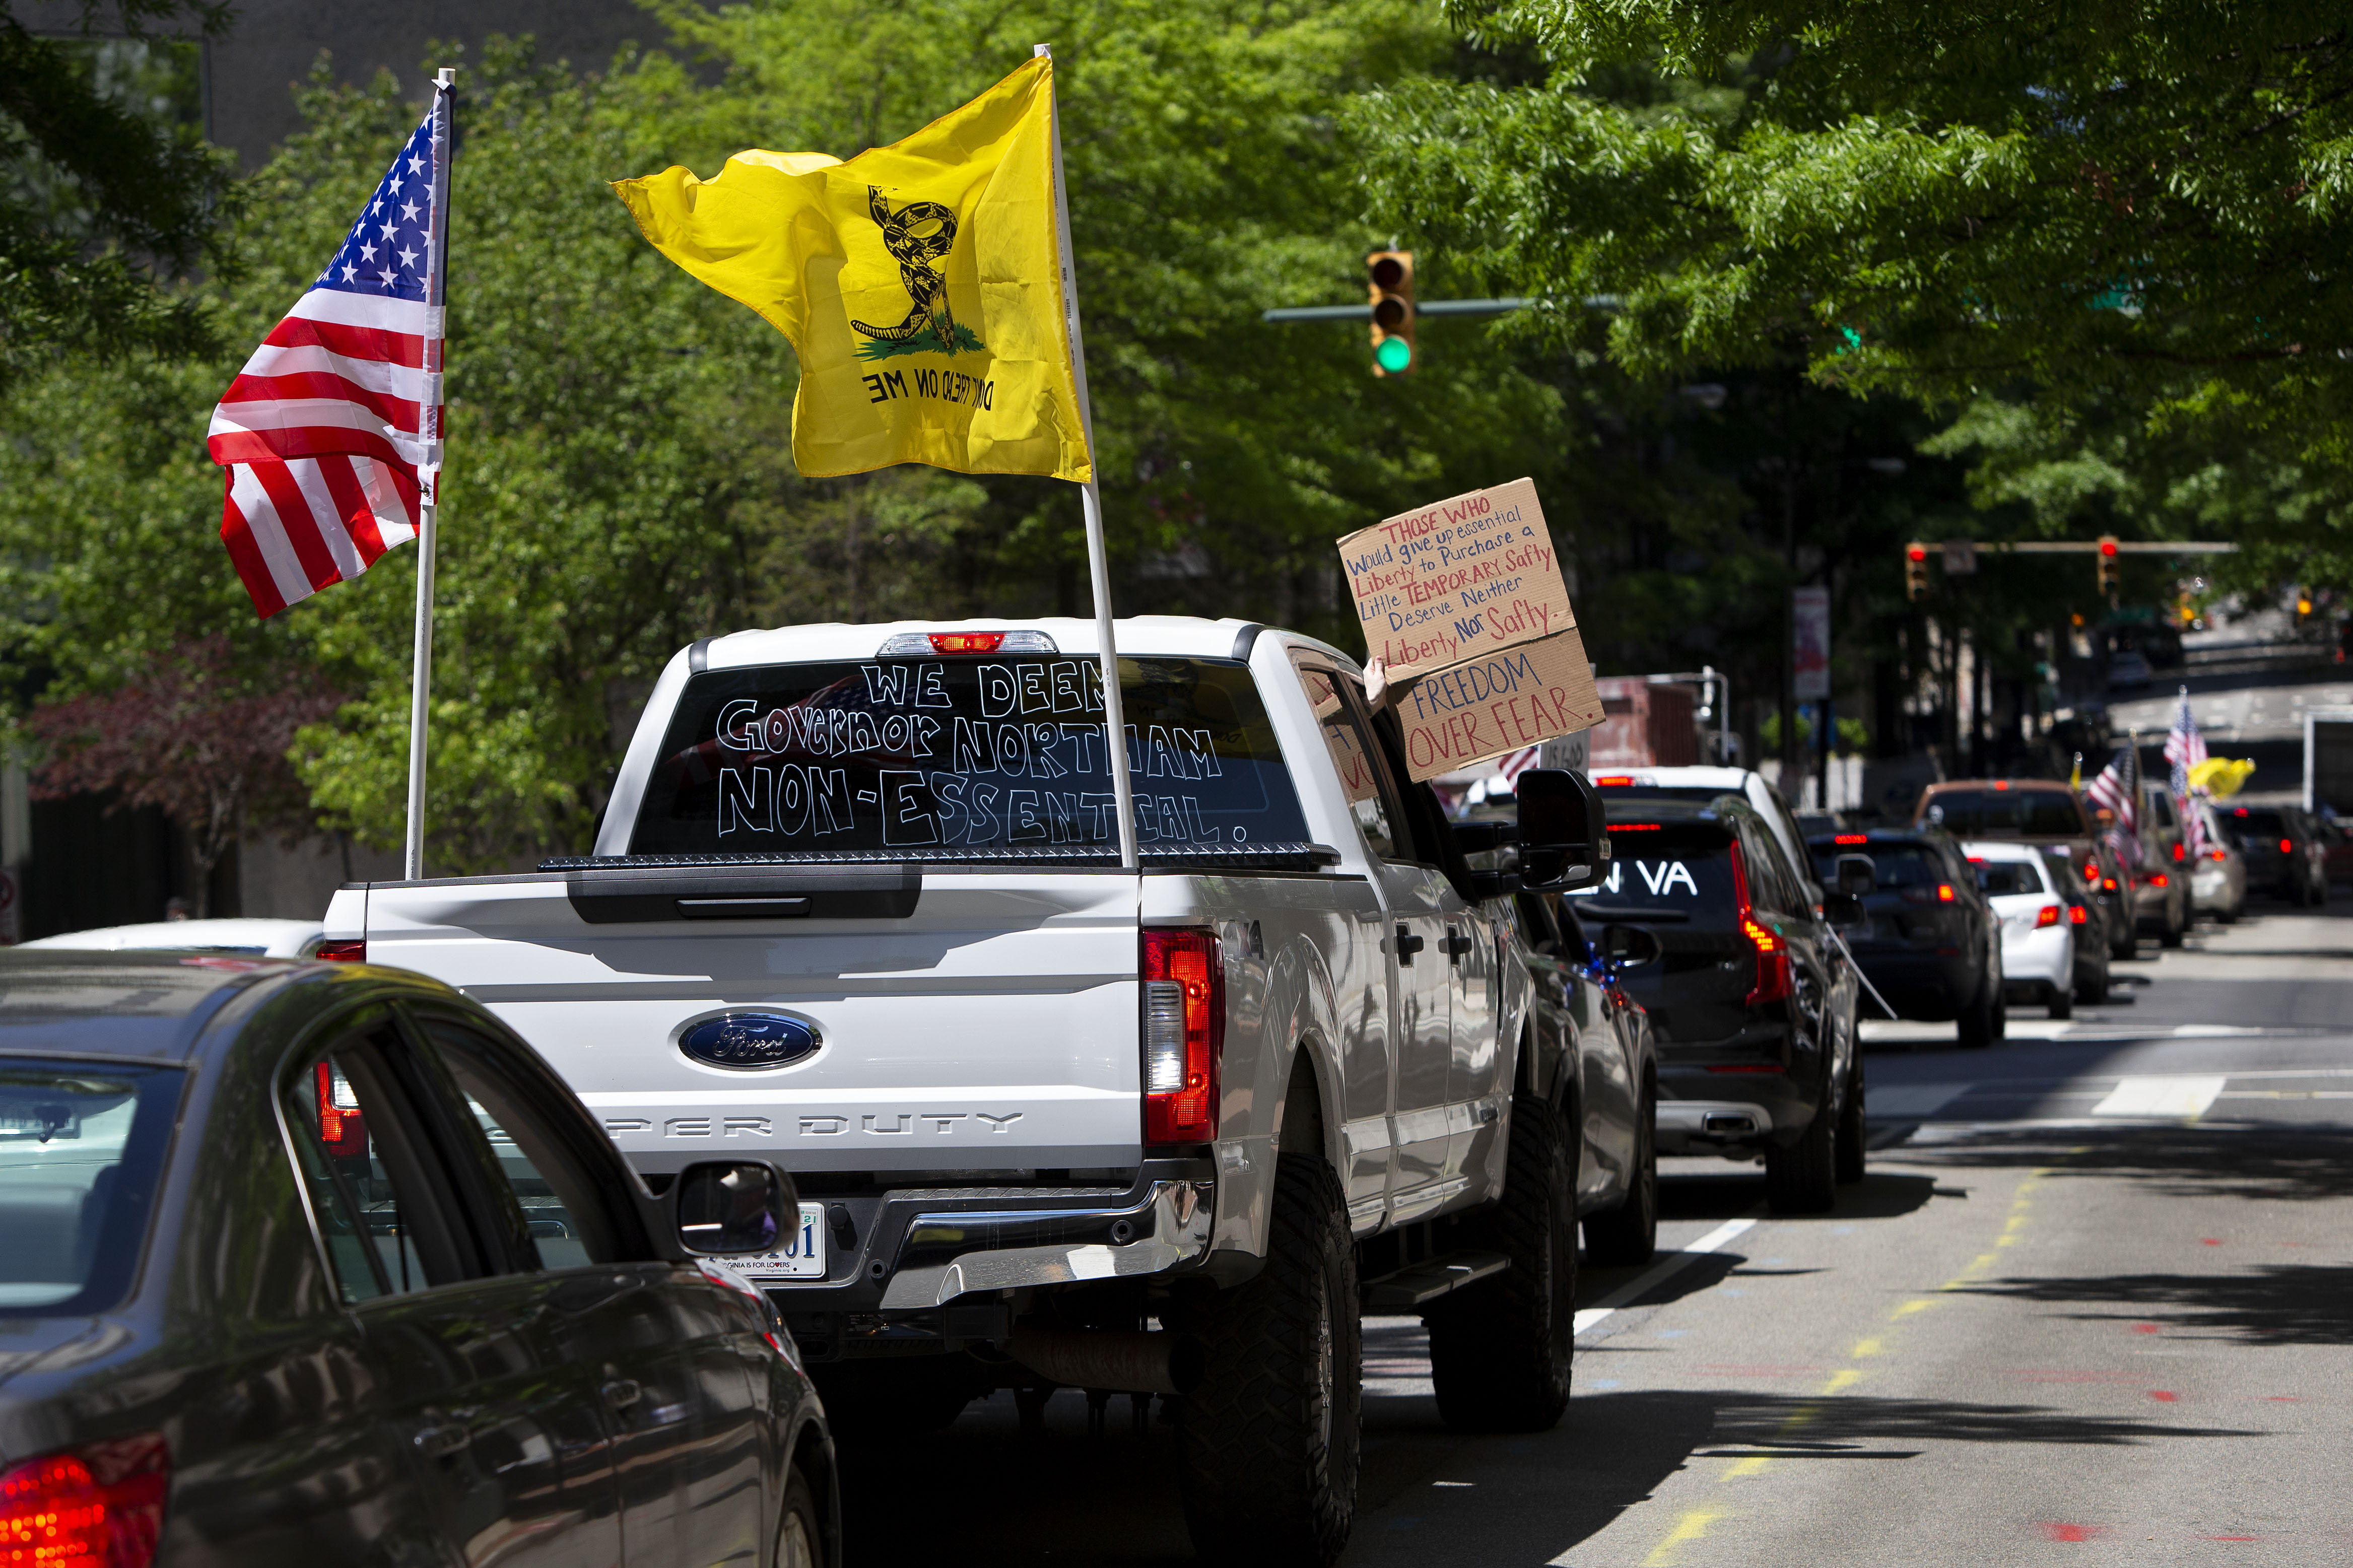 Drivers honk their horns during a reopen Virginia rally around Capitol Square in Richmond on April 22, 2020. (Photo by RYAN M. KELLY/AFP via Getty Images)